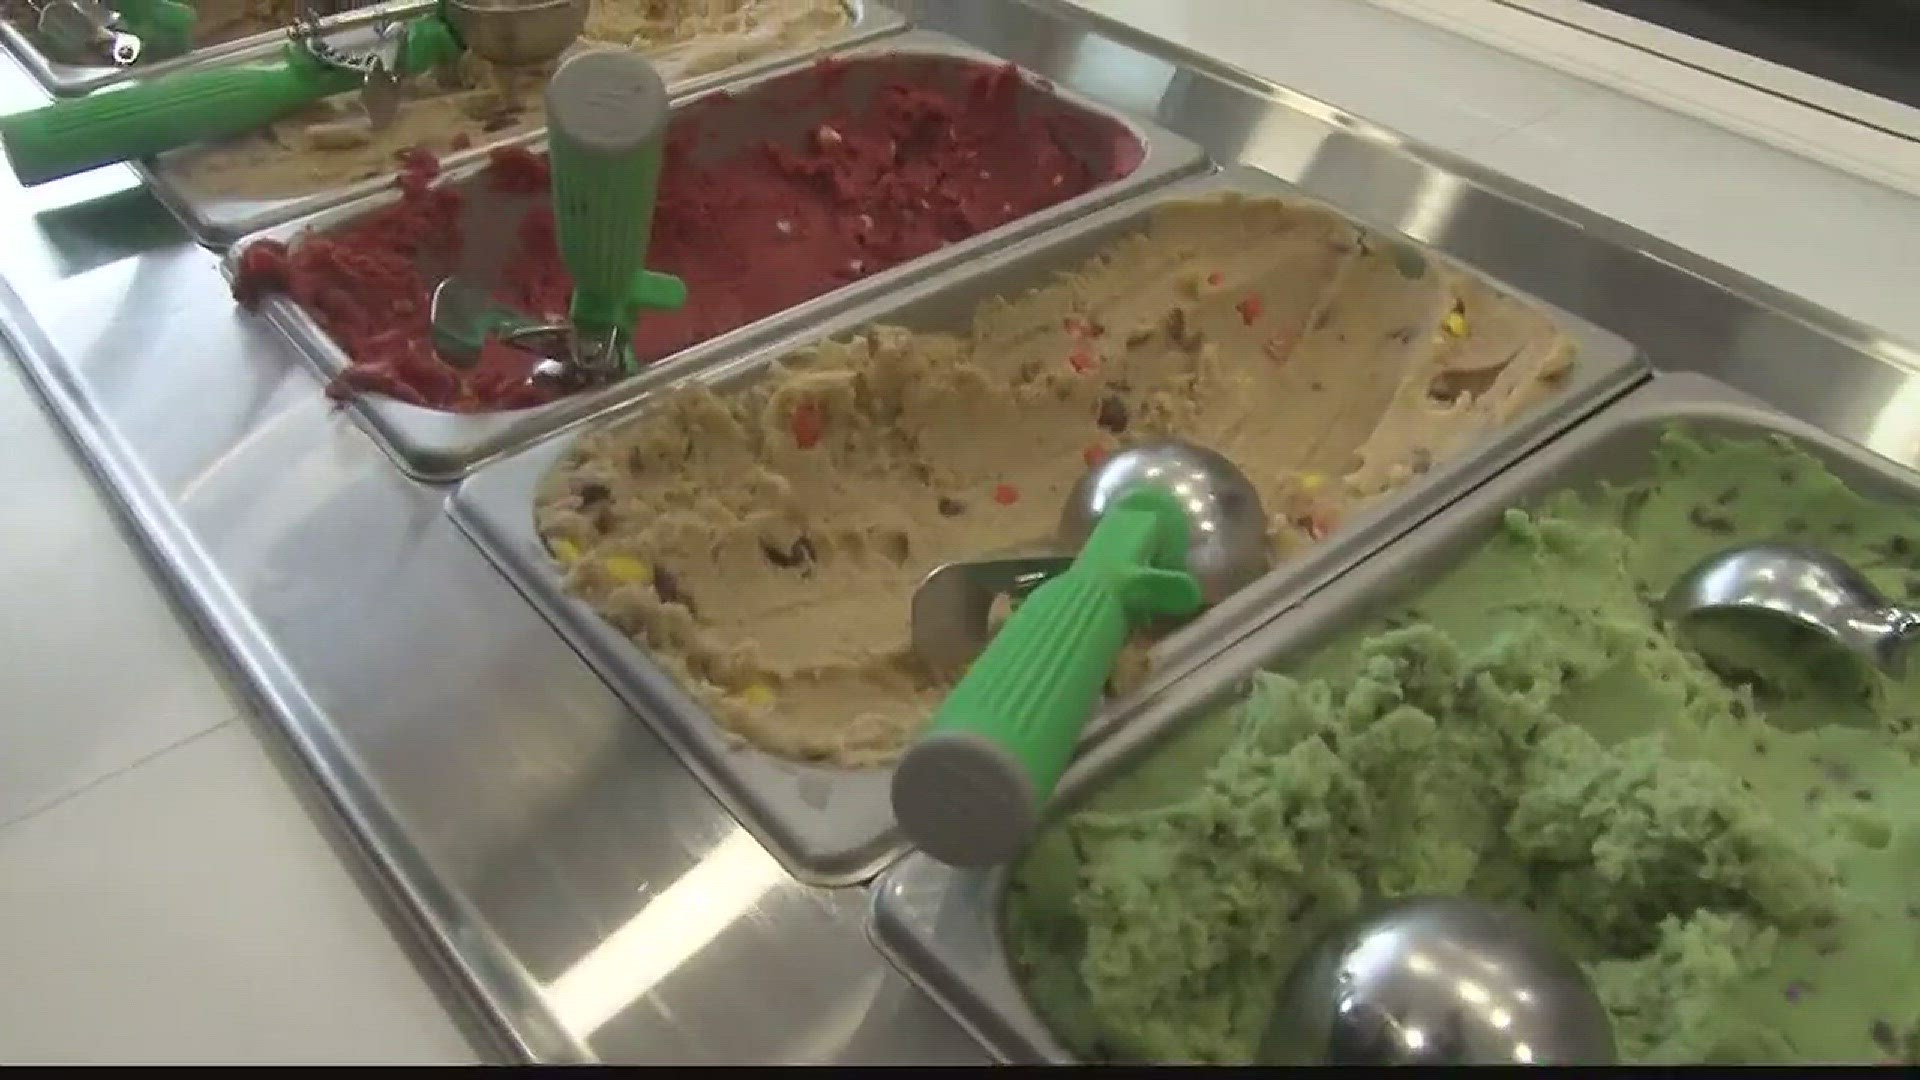 A new spot at the Walden Galleria serves up cookie dough that's safe - and delicious - to eat.  Daybreak's Melissa Holmes takes us to Dough Boyz.